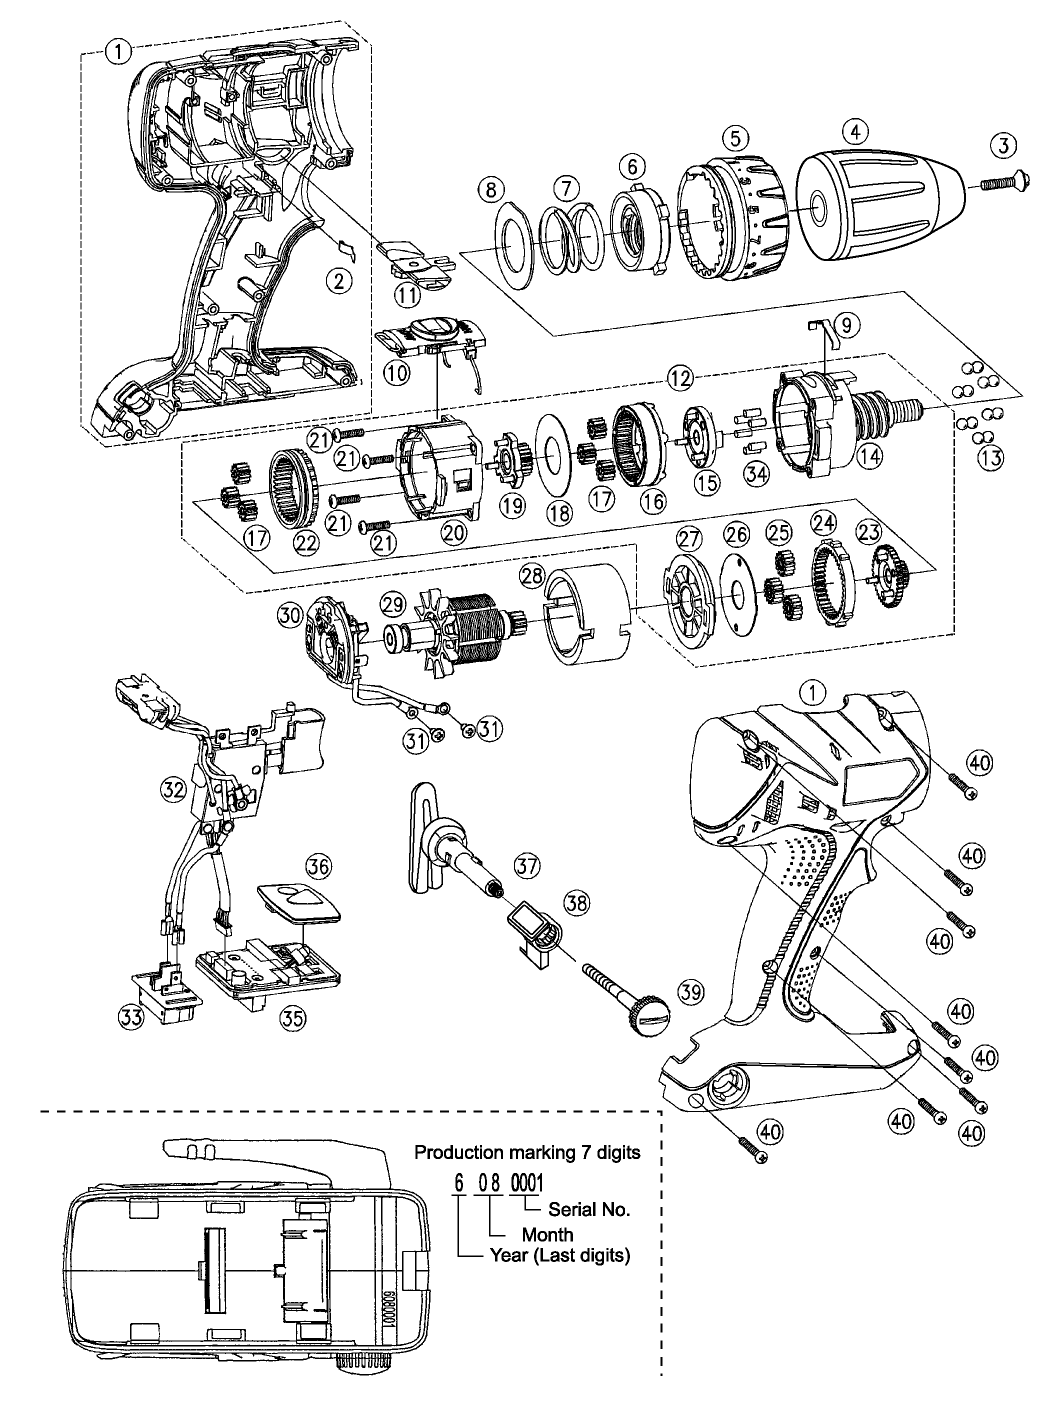 EY7440: Exploded View